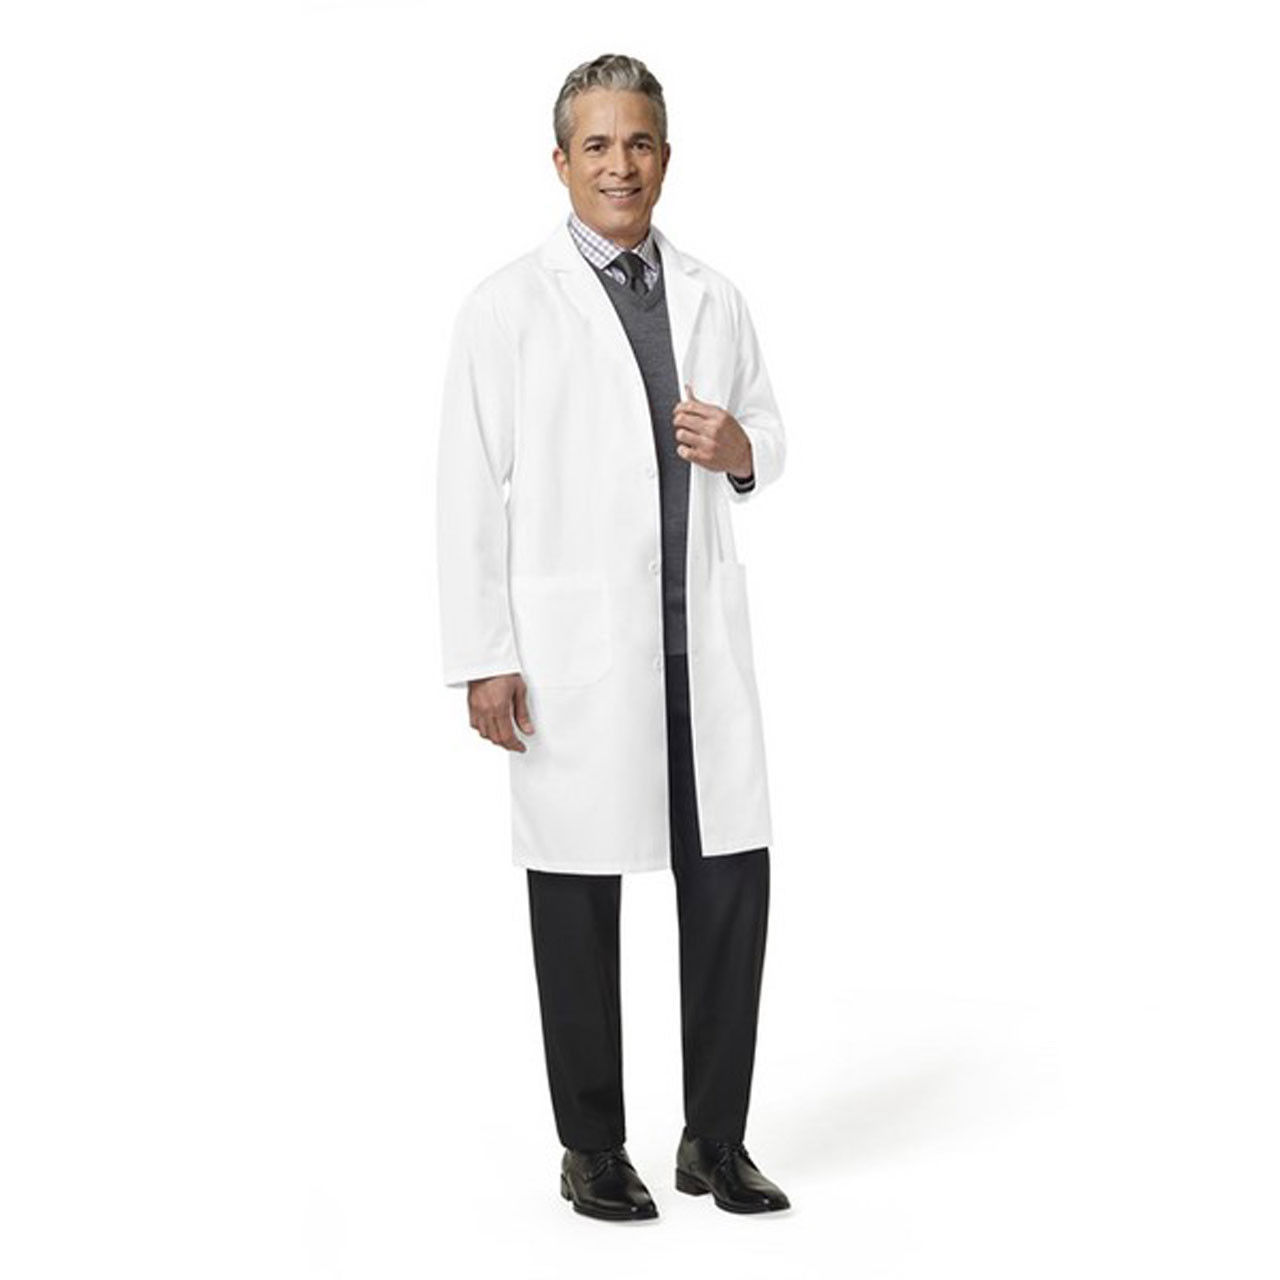 Is this lab coat suitable as jackets for men in bulk?